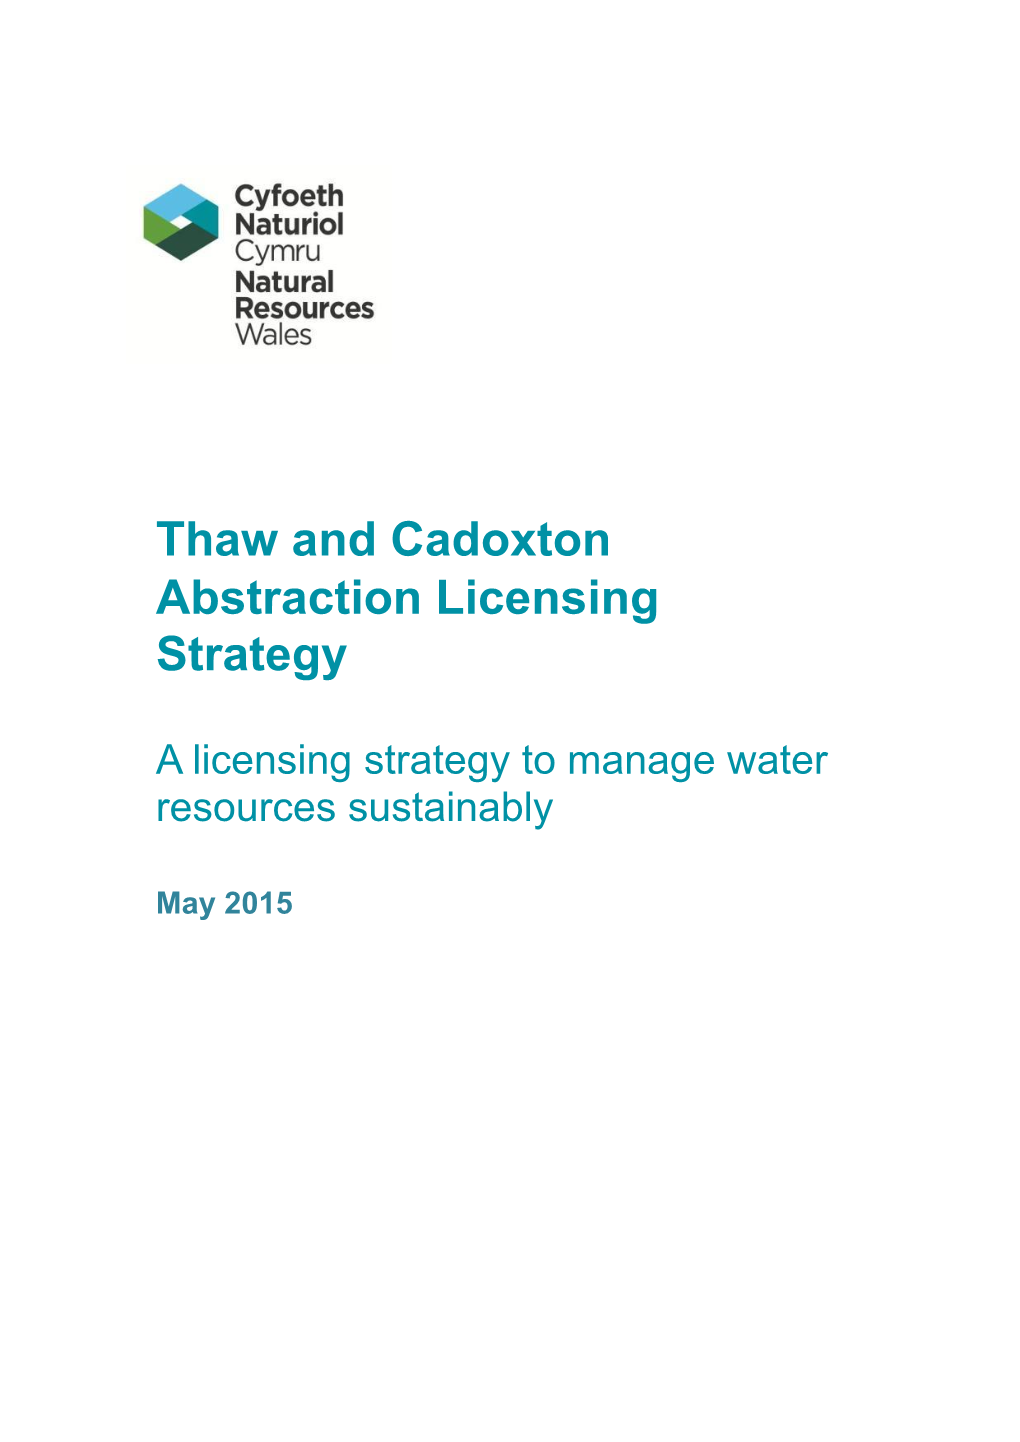 Thaw and Cadoxton Abstraction Licensing Strategy – May 2015